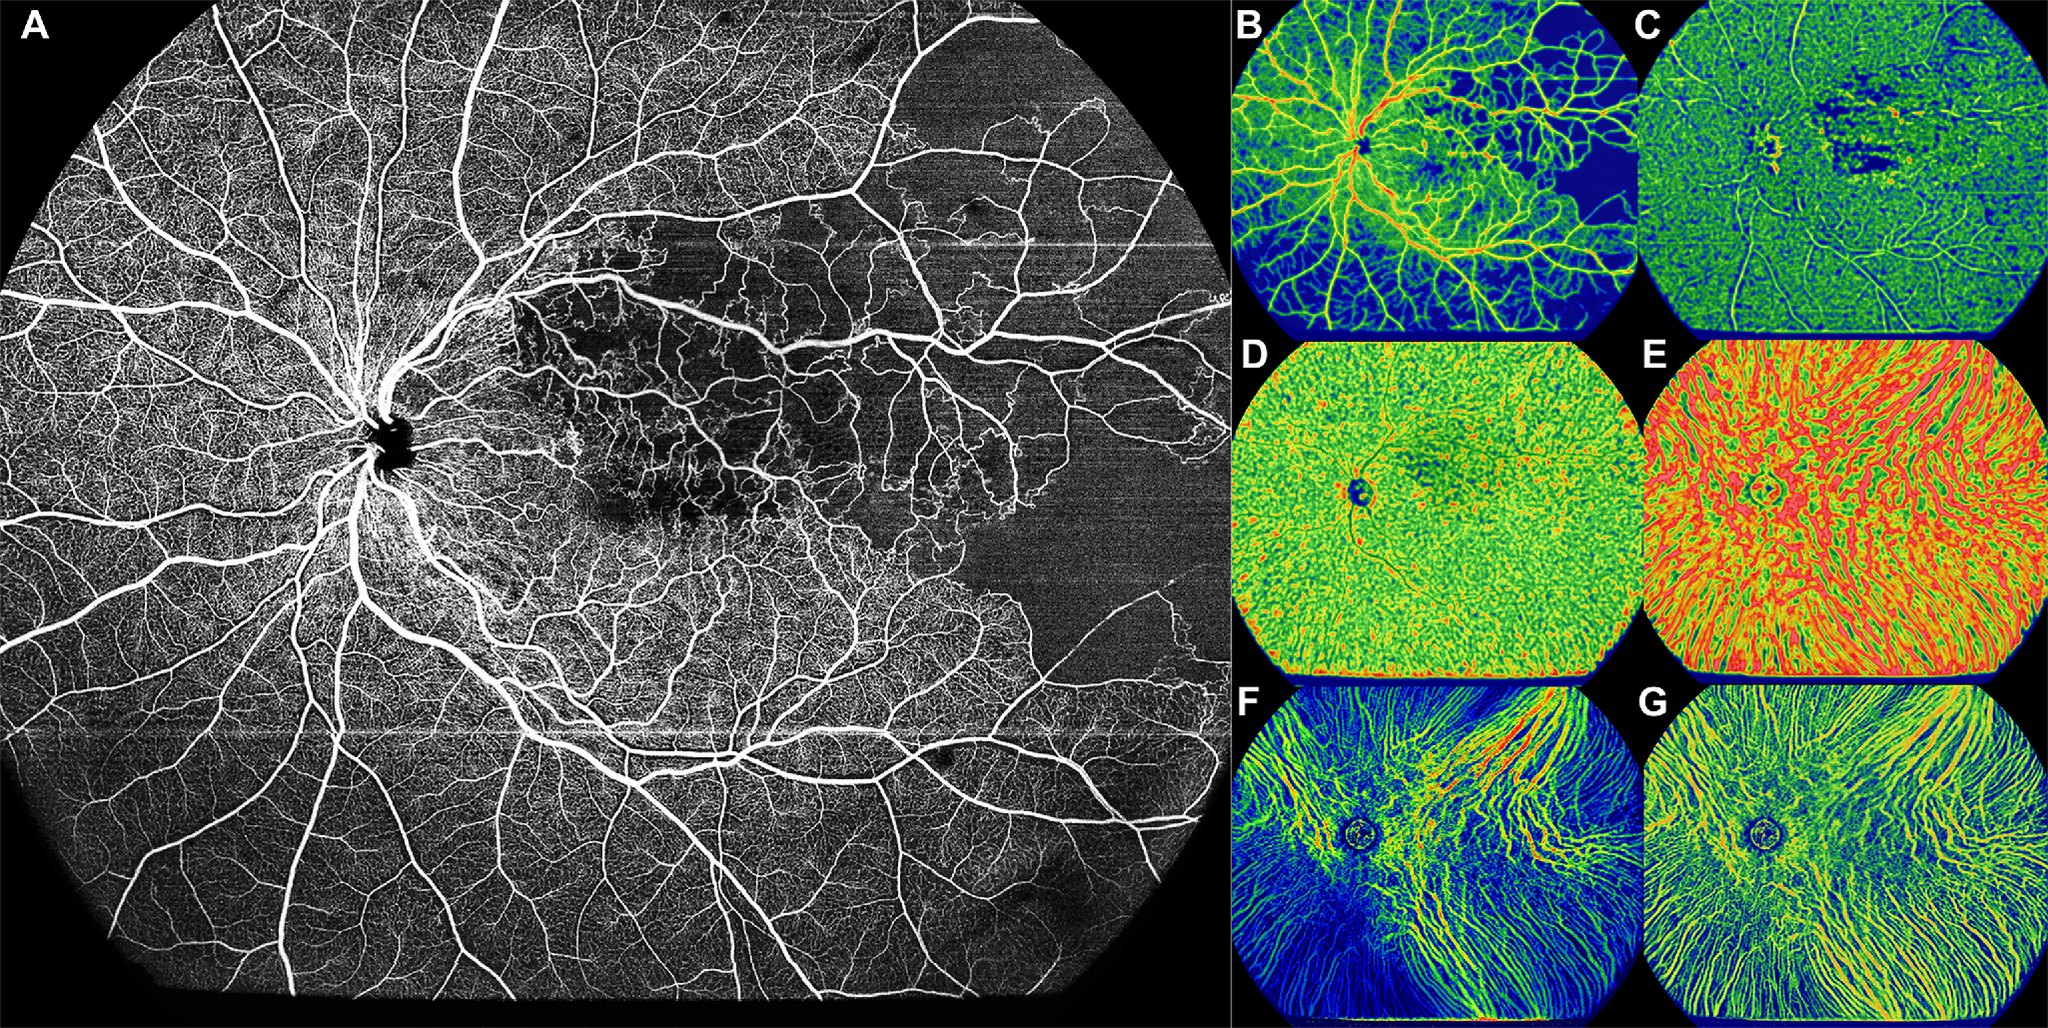 Central and Peripheral Changes Found in Both RVO Eyes and Unaffected Fellow Eyes